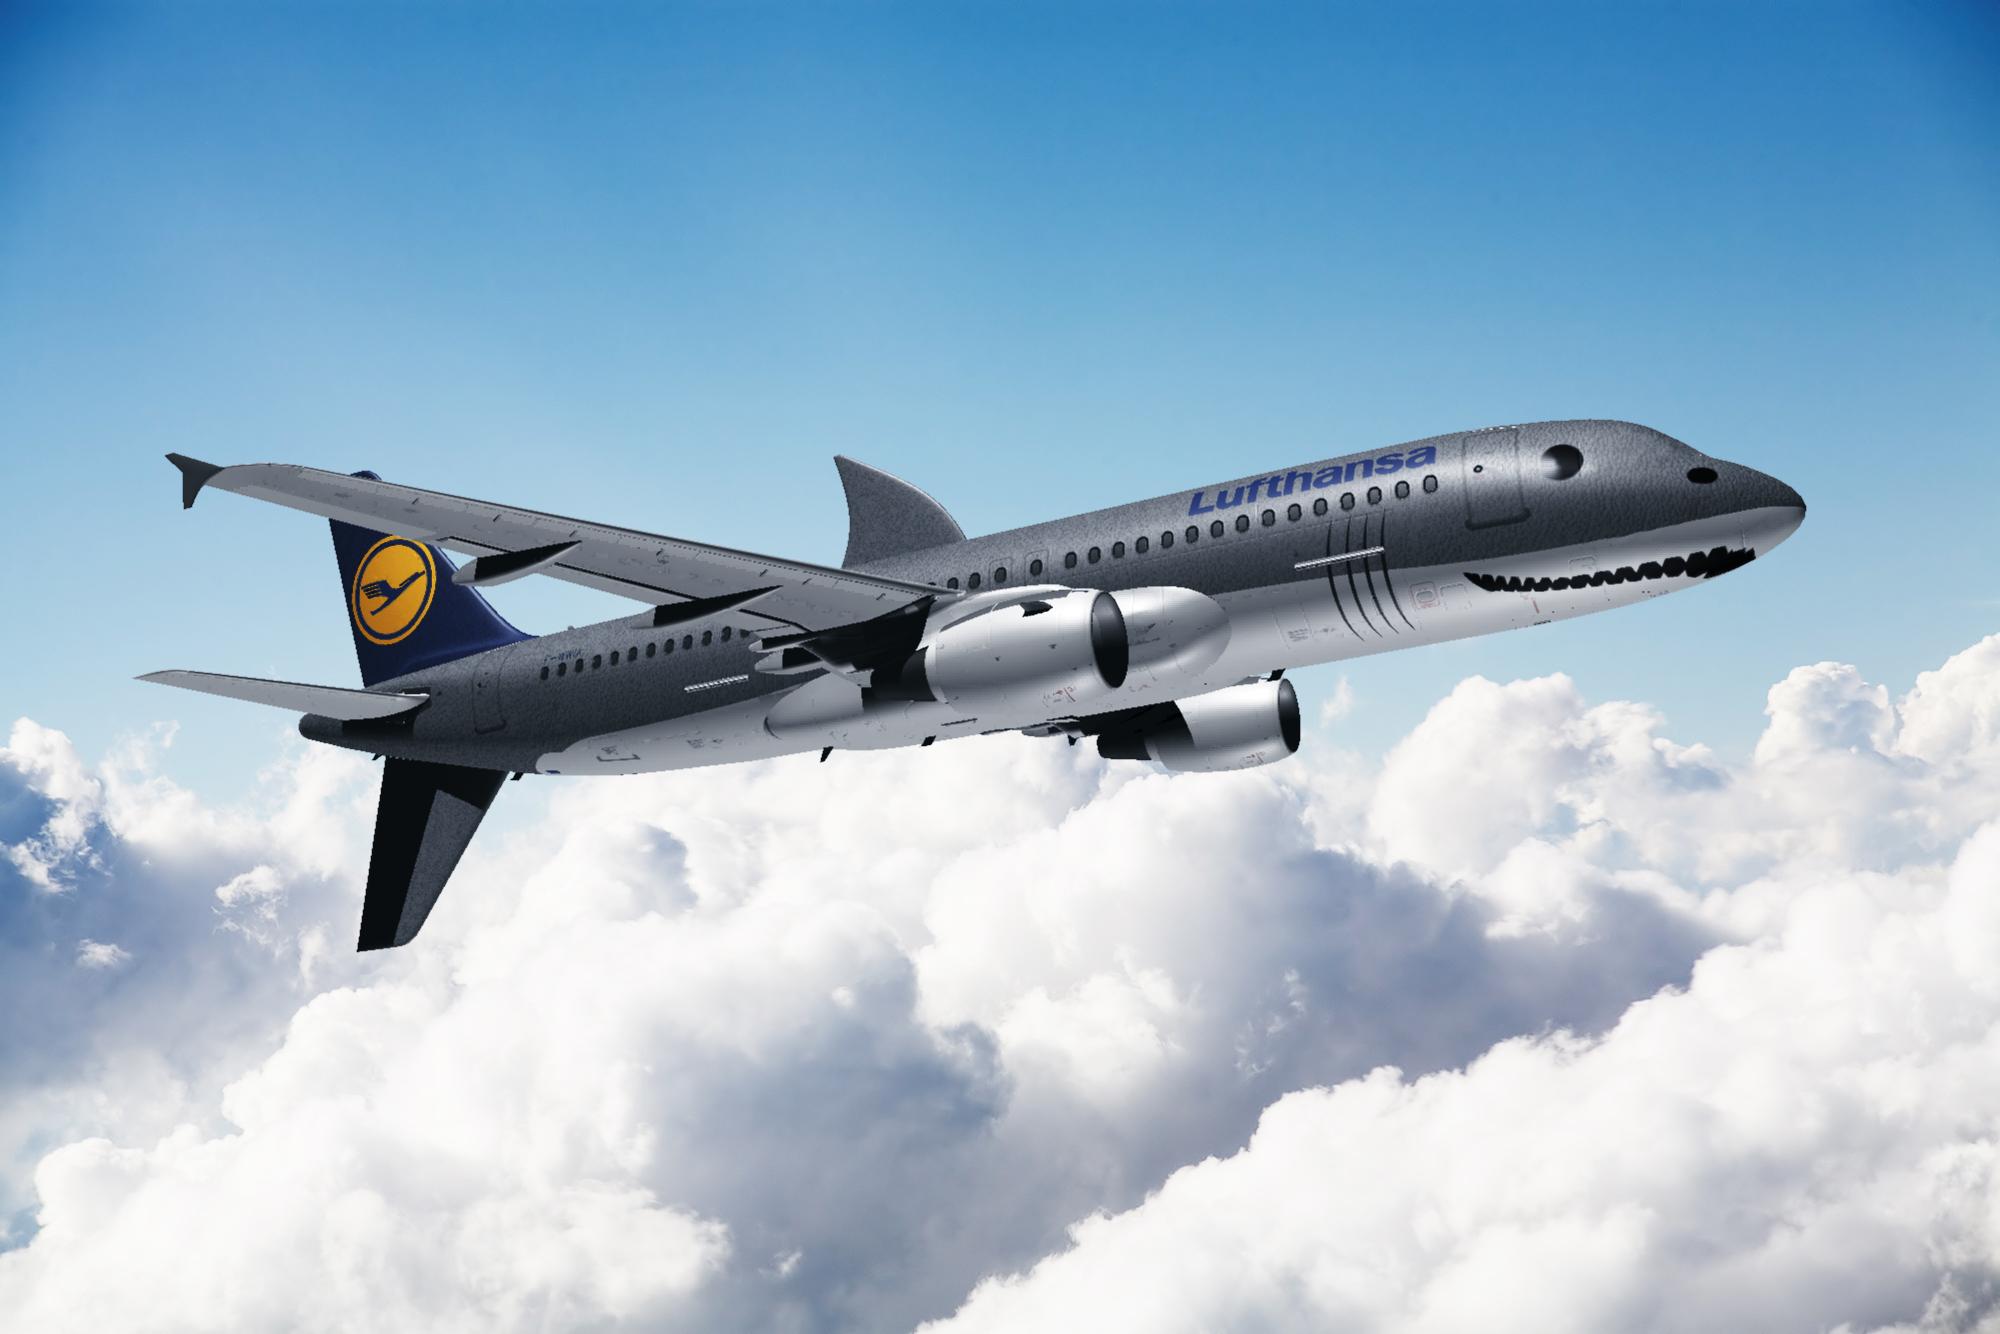 Lufthansa USA on Twitter: "Does anyone have #leftshark's phone number? Asking for a friend. http ...